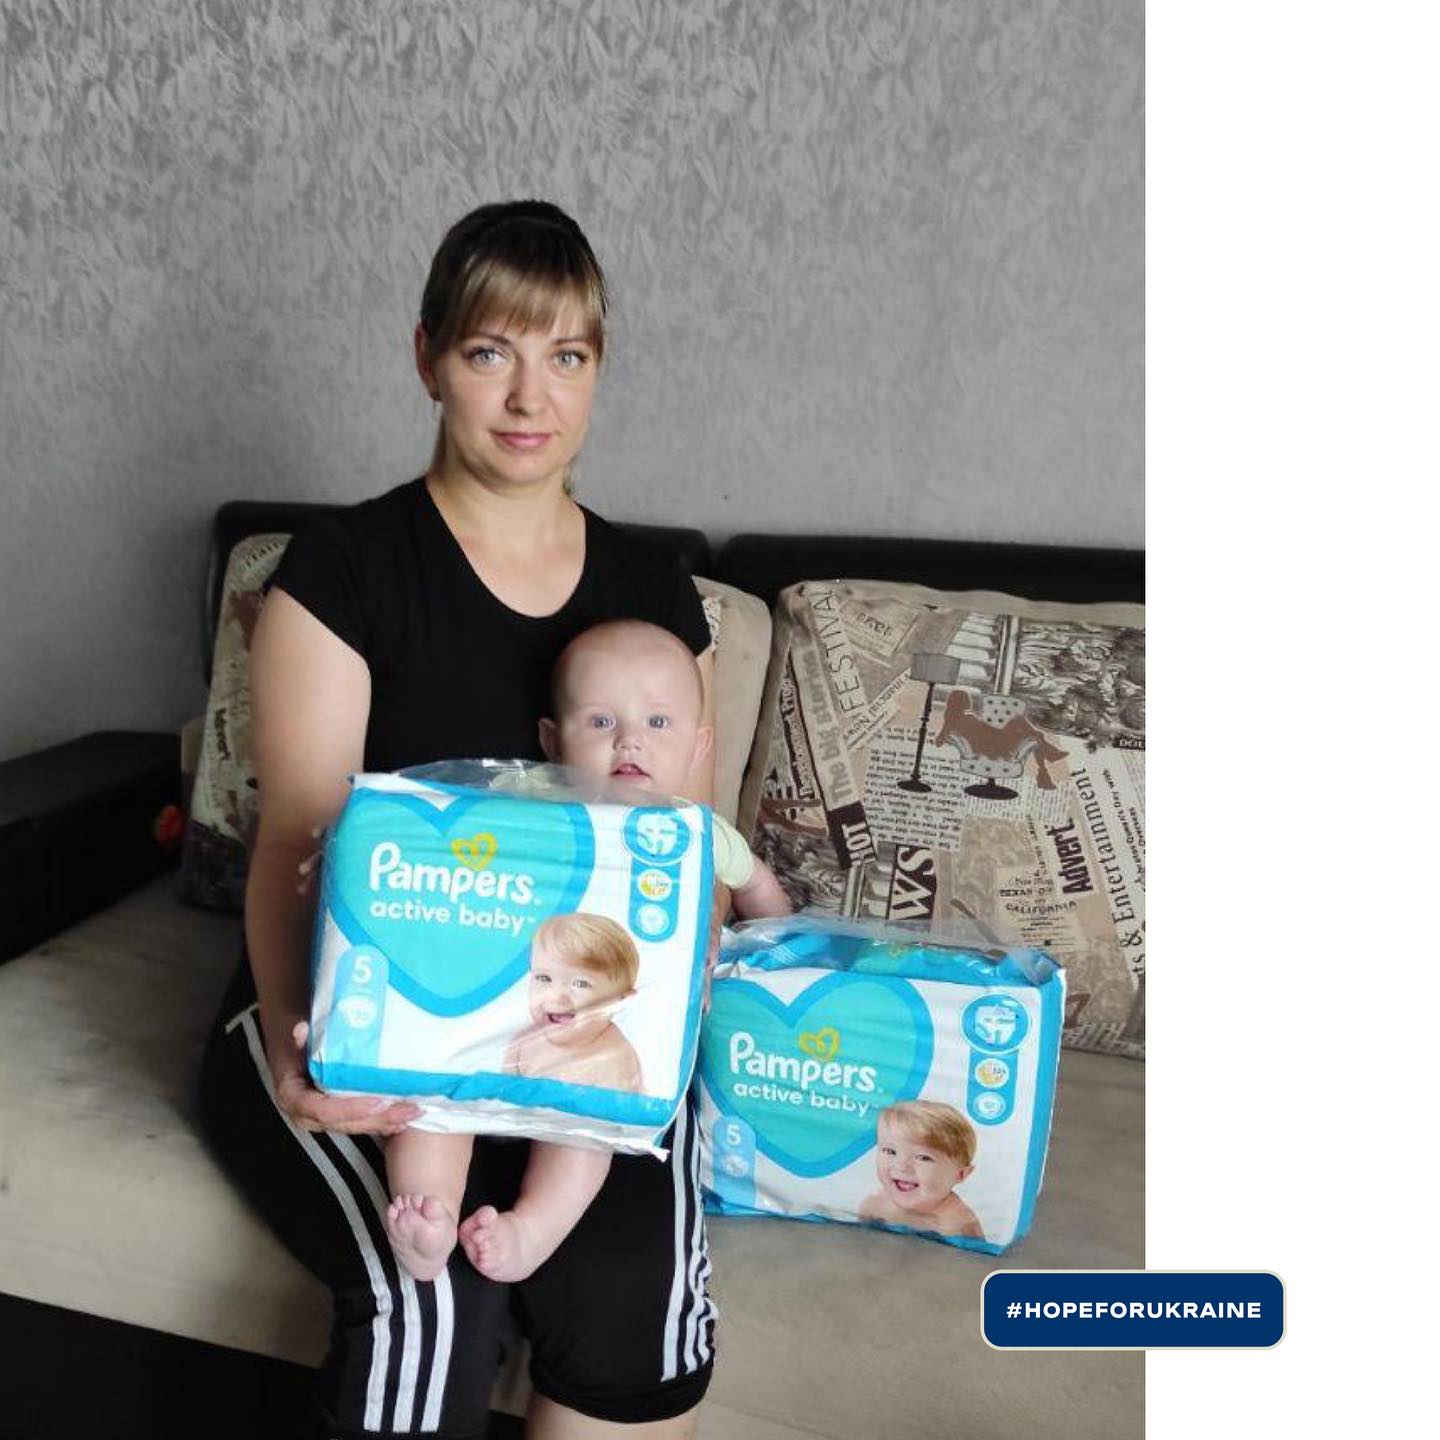 a woman with a baby sitting on a couch holding a pack of pampers diapers.